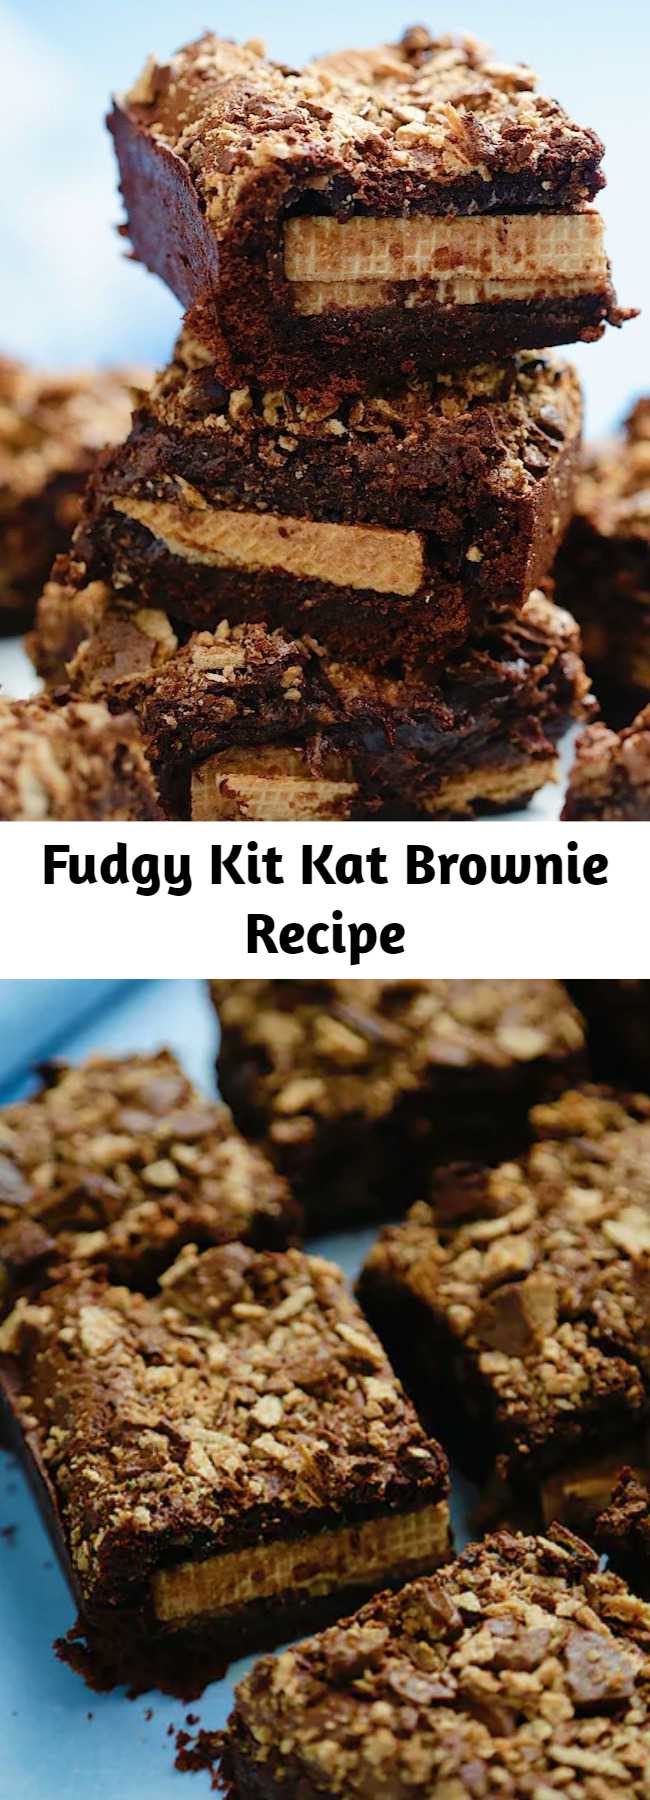 Fudgy Kit Kat Brownie Recipe - Deliciously thick and fudgy chocolate brownies that are stuffed with whole KitKats, and generously topped with broken KitKats! We added some Kit Kats and took brownies to a whole new level.